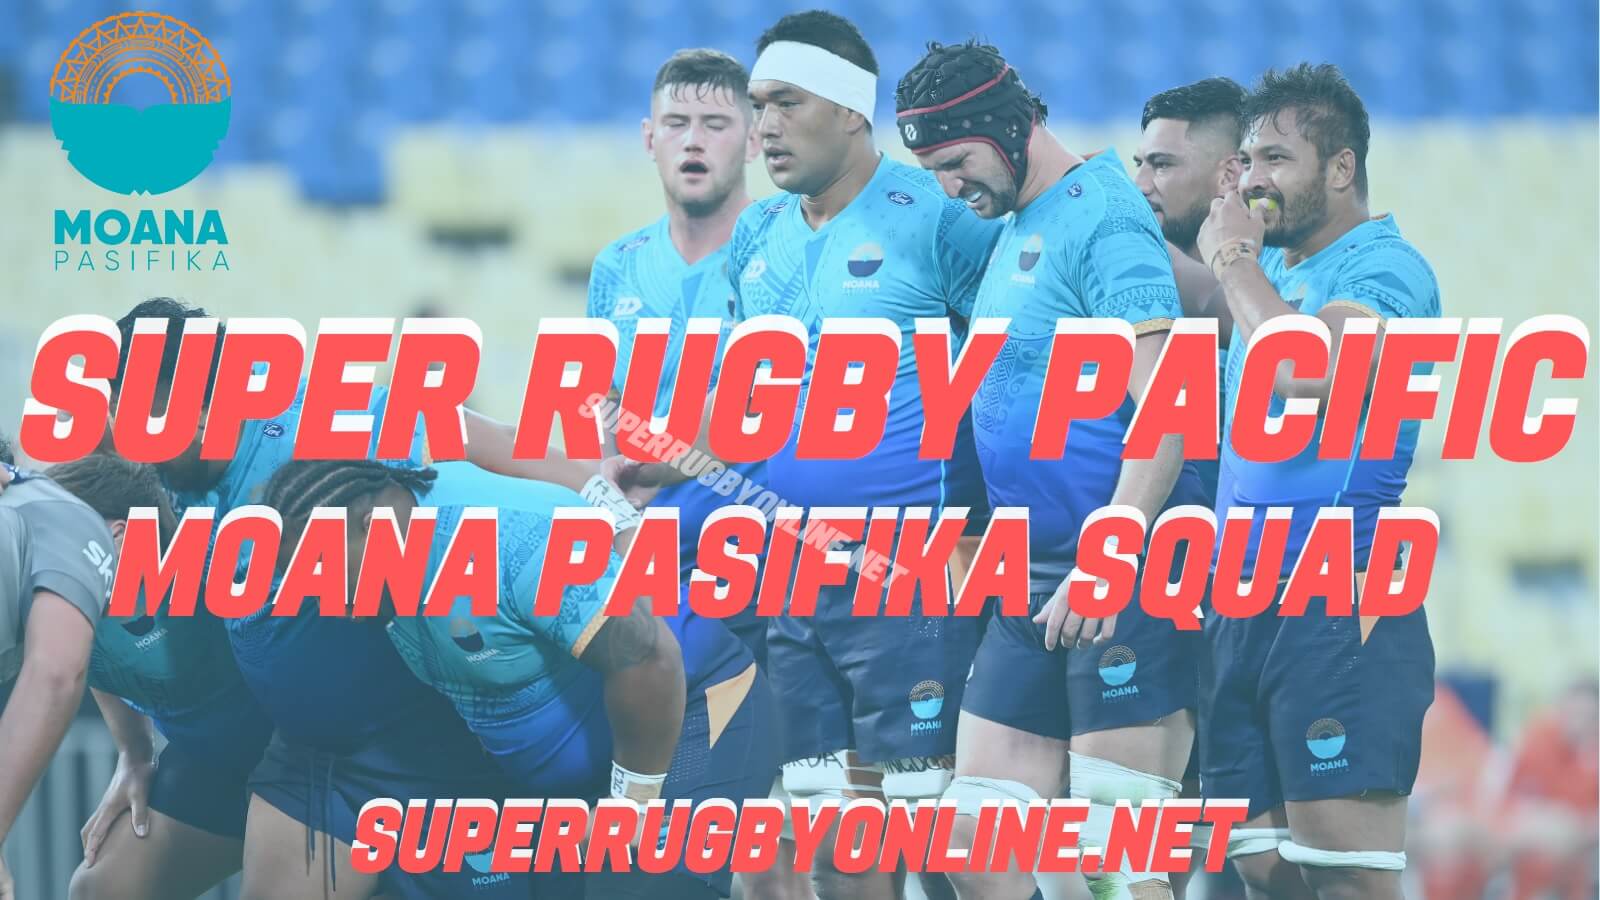 Moana Pasifika Squad Super Rugby Pacific